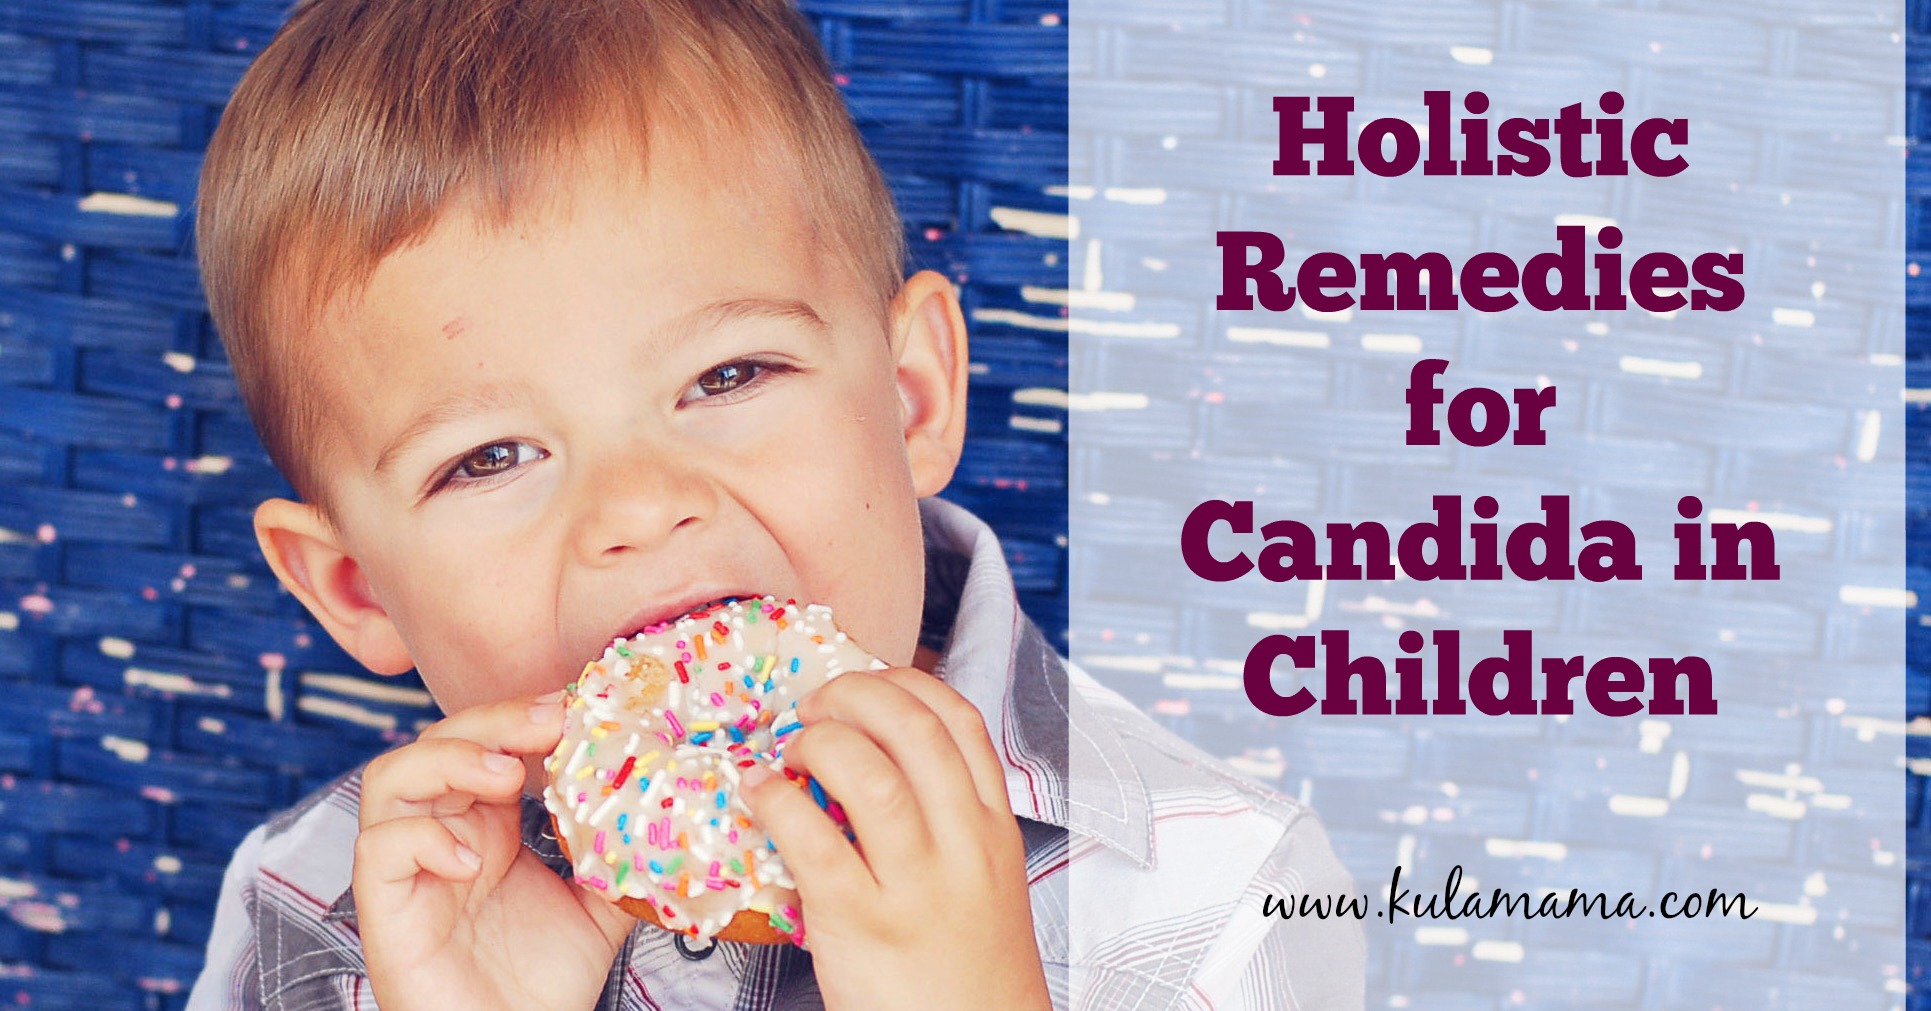 Holistic Remedies for Candida in Children